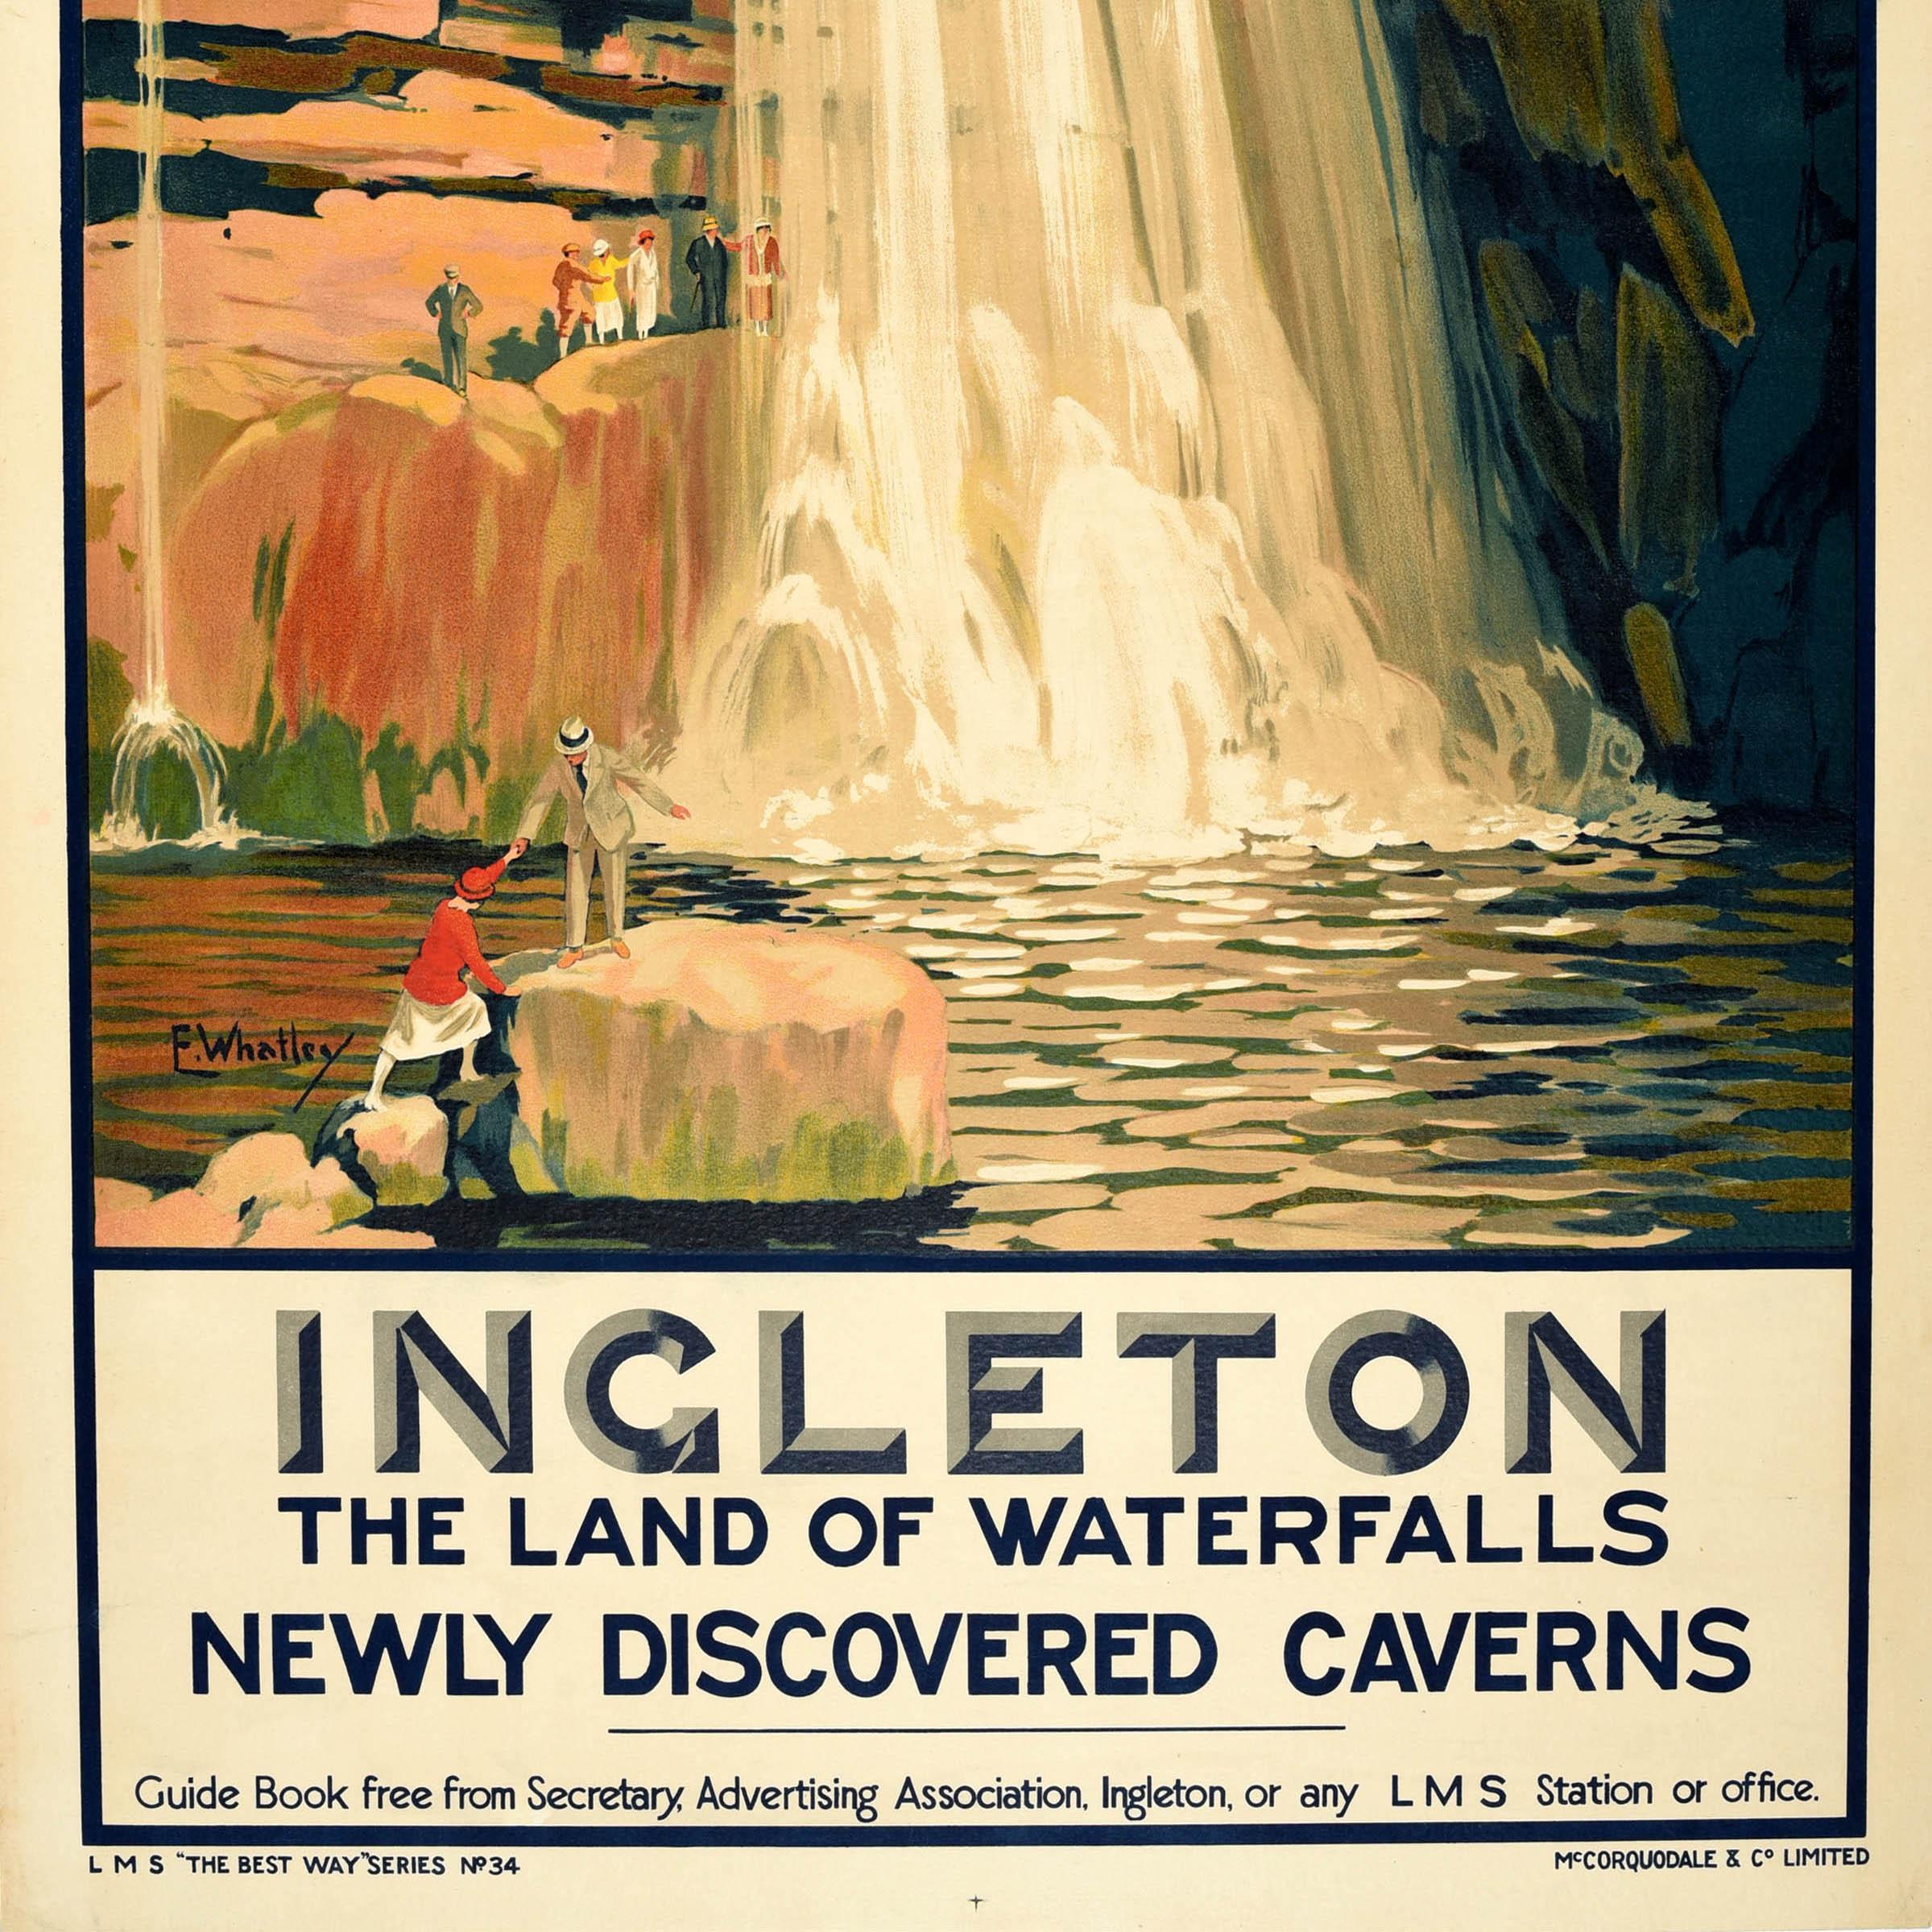 Original Vintage Railway Travel Poster Ingleton Land Of Waterfalls LMS Whatley In Good Condition For Sale In London, GB